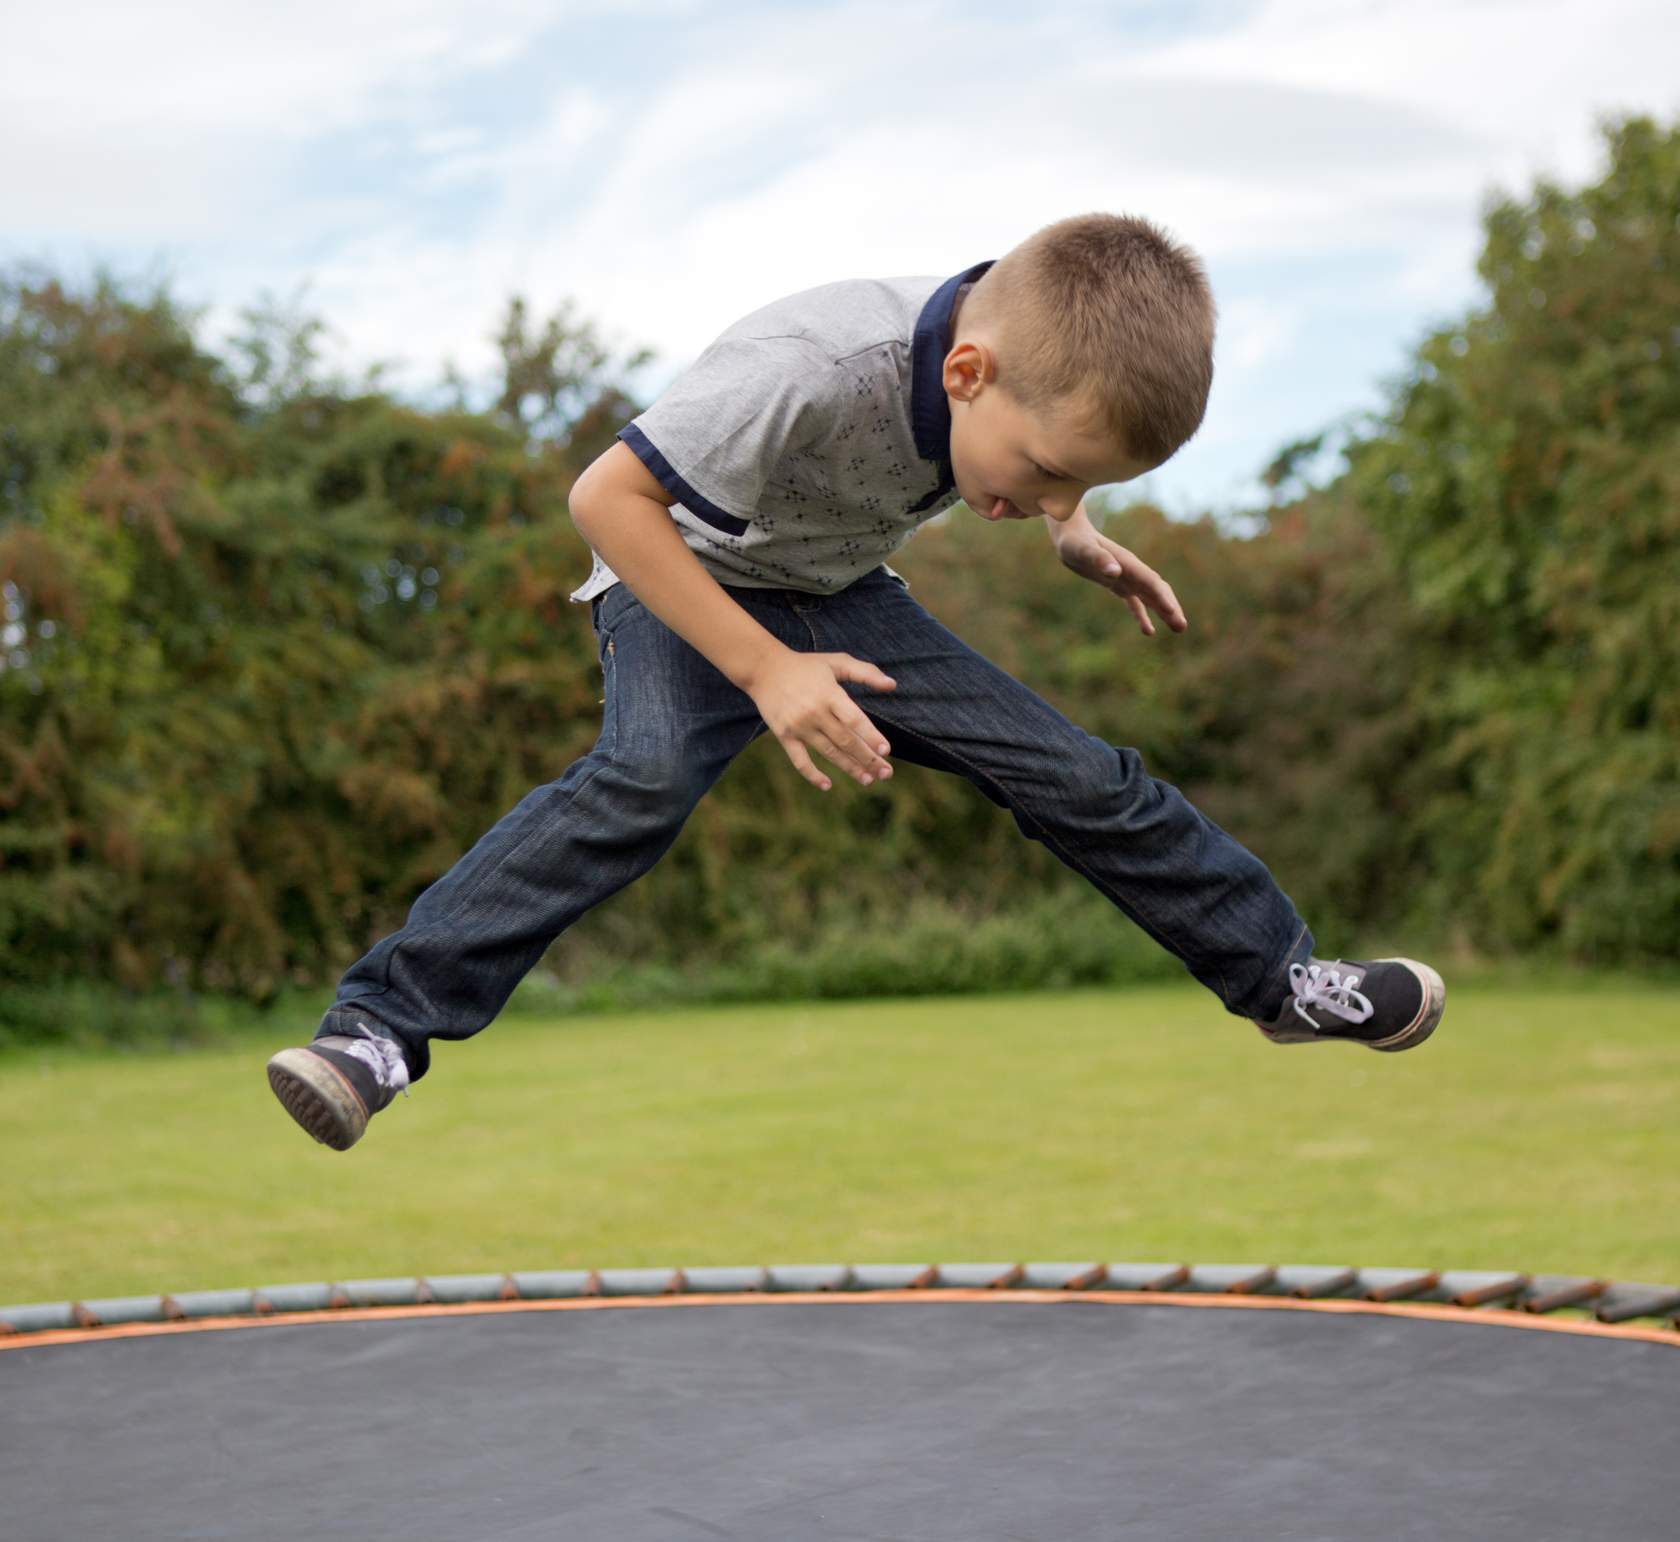 A boy experiencing joy while jumping on a trampoline.